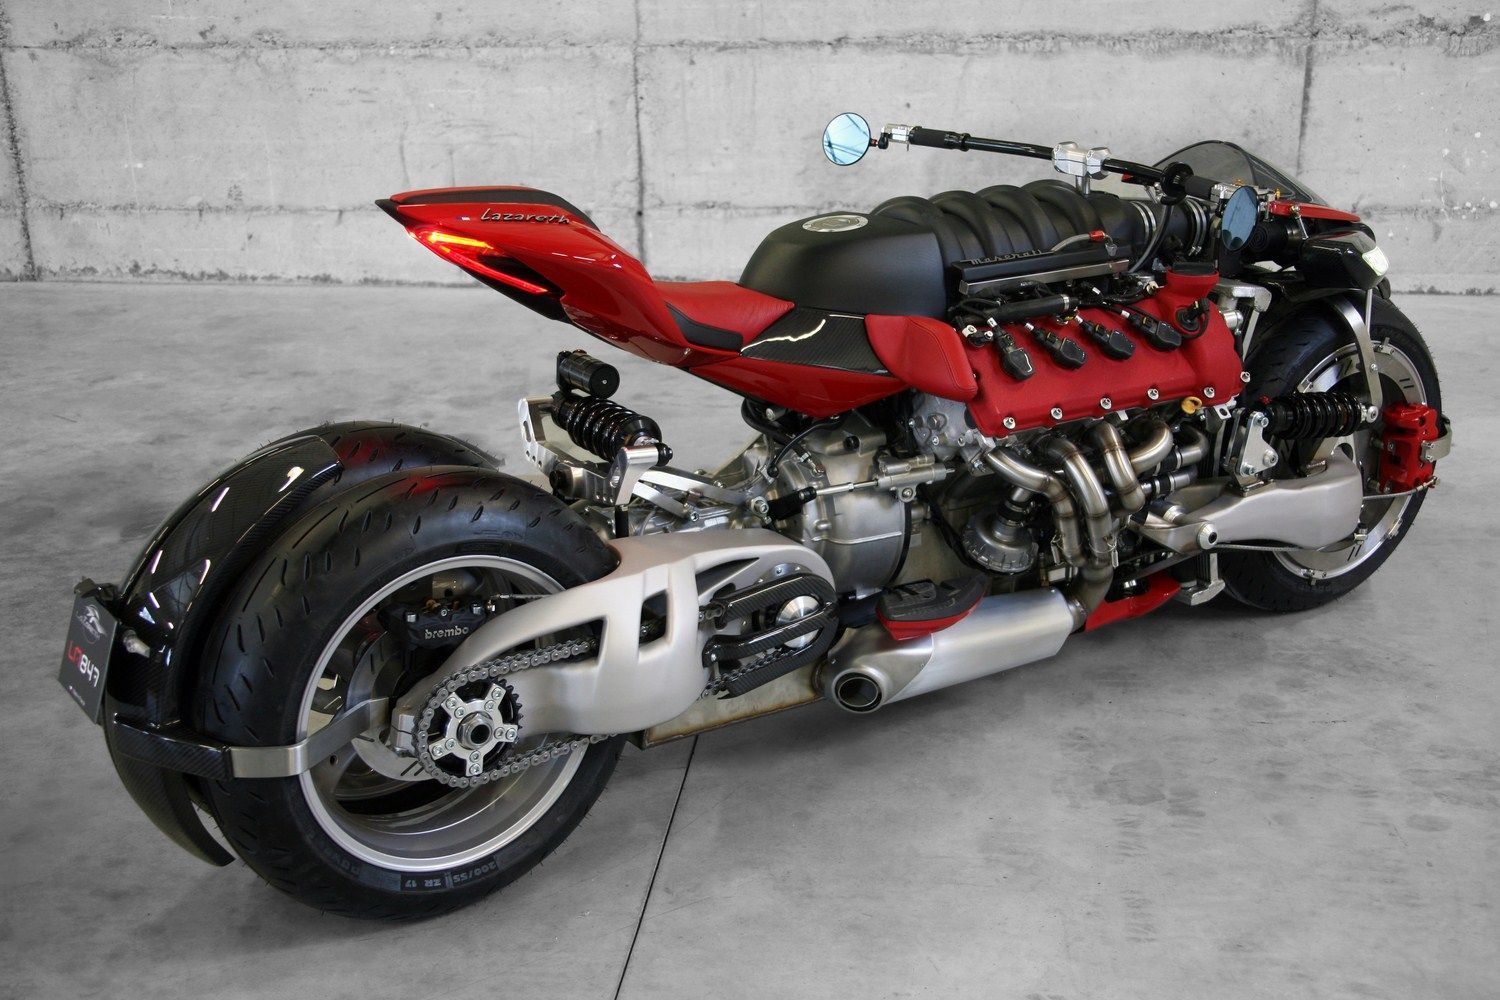 While the Panigale is a beautiful bike, for $225K, we'd love a unique tail section on the 847